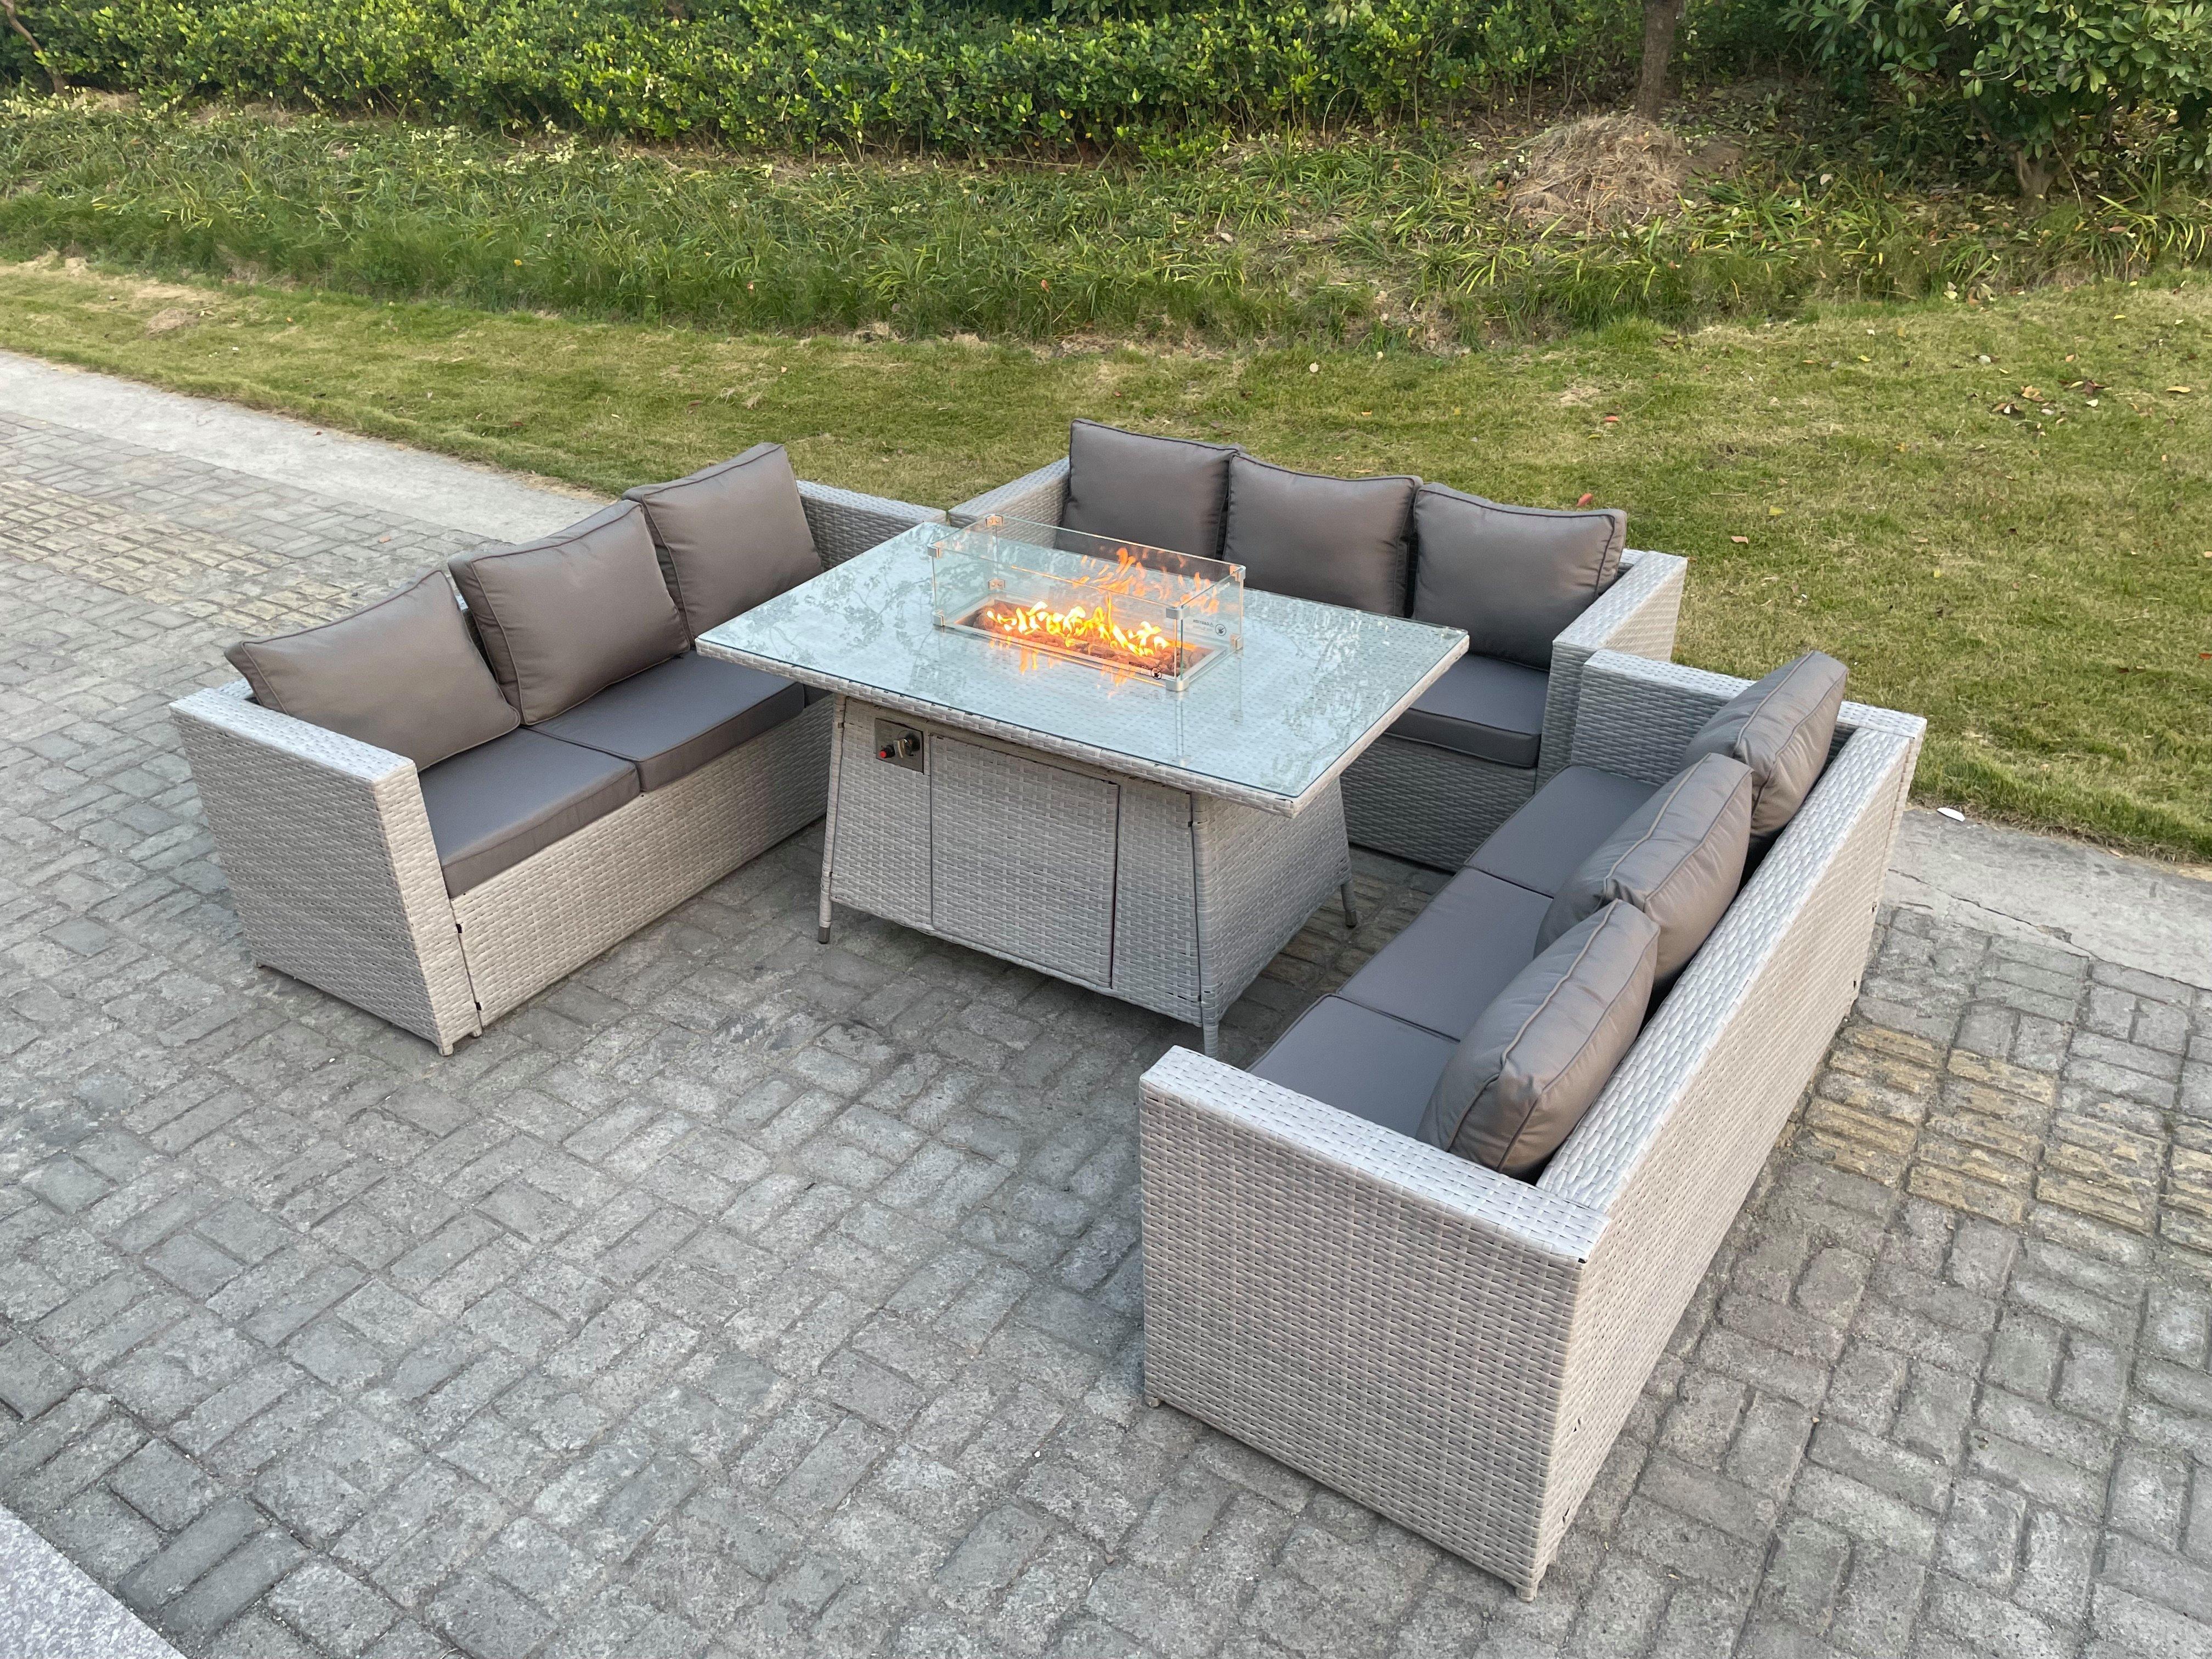 Light Grey U Shape Lounge Sofa Dining Set With Gas Fire Pit Dining Table Garden Furniture Set Heater